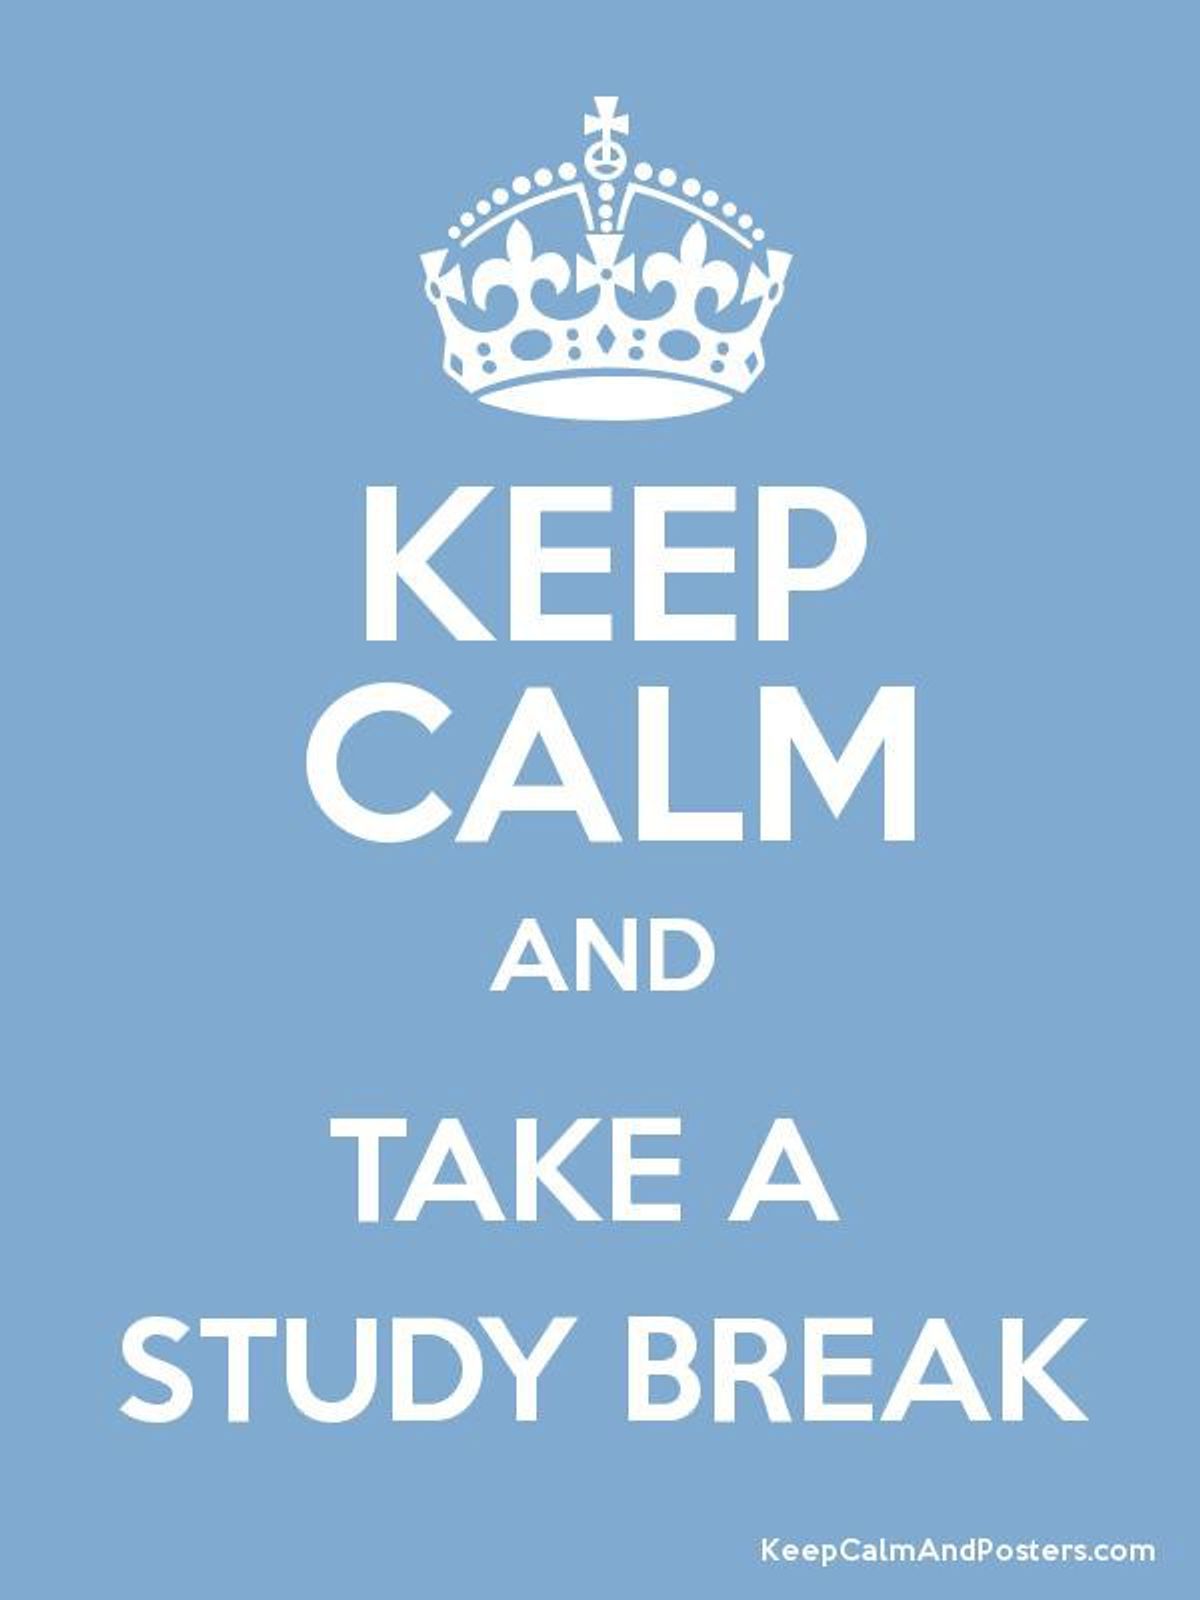 5 Of The Best Things To Do When You Need A Study Break